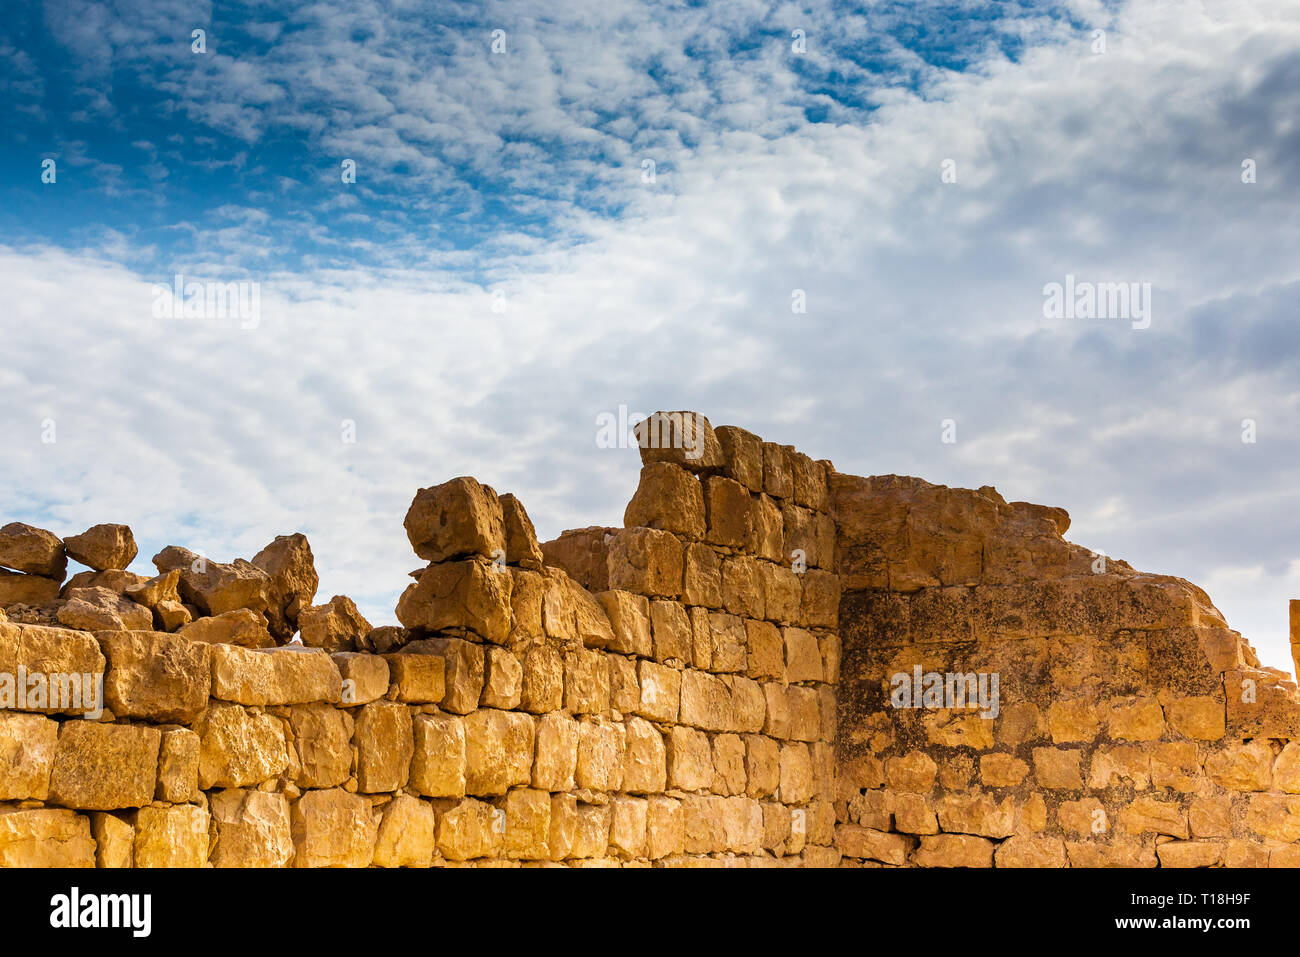 SHIVTA, ISRAEL / FEB 18, 2018:  This ancient Christian Nabatean city in Israel's Negev desert was abandoned some 200 years after the Muslim conquest i Stock Photo